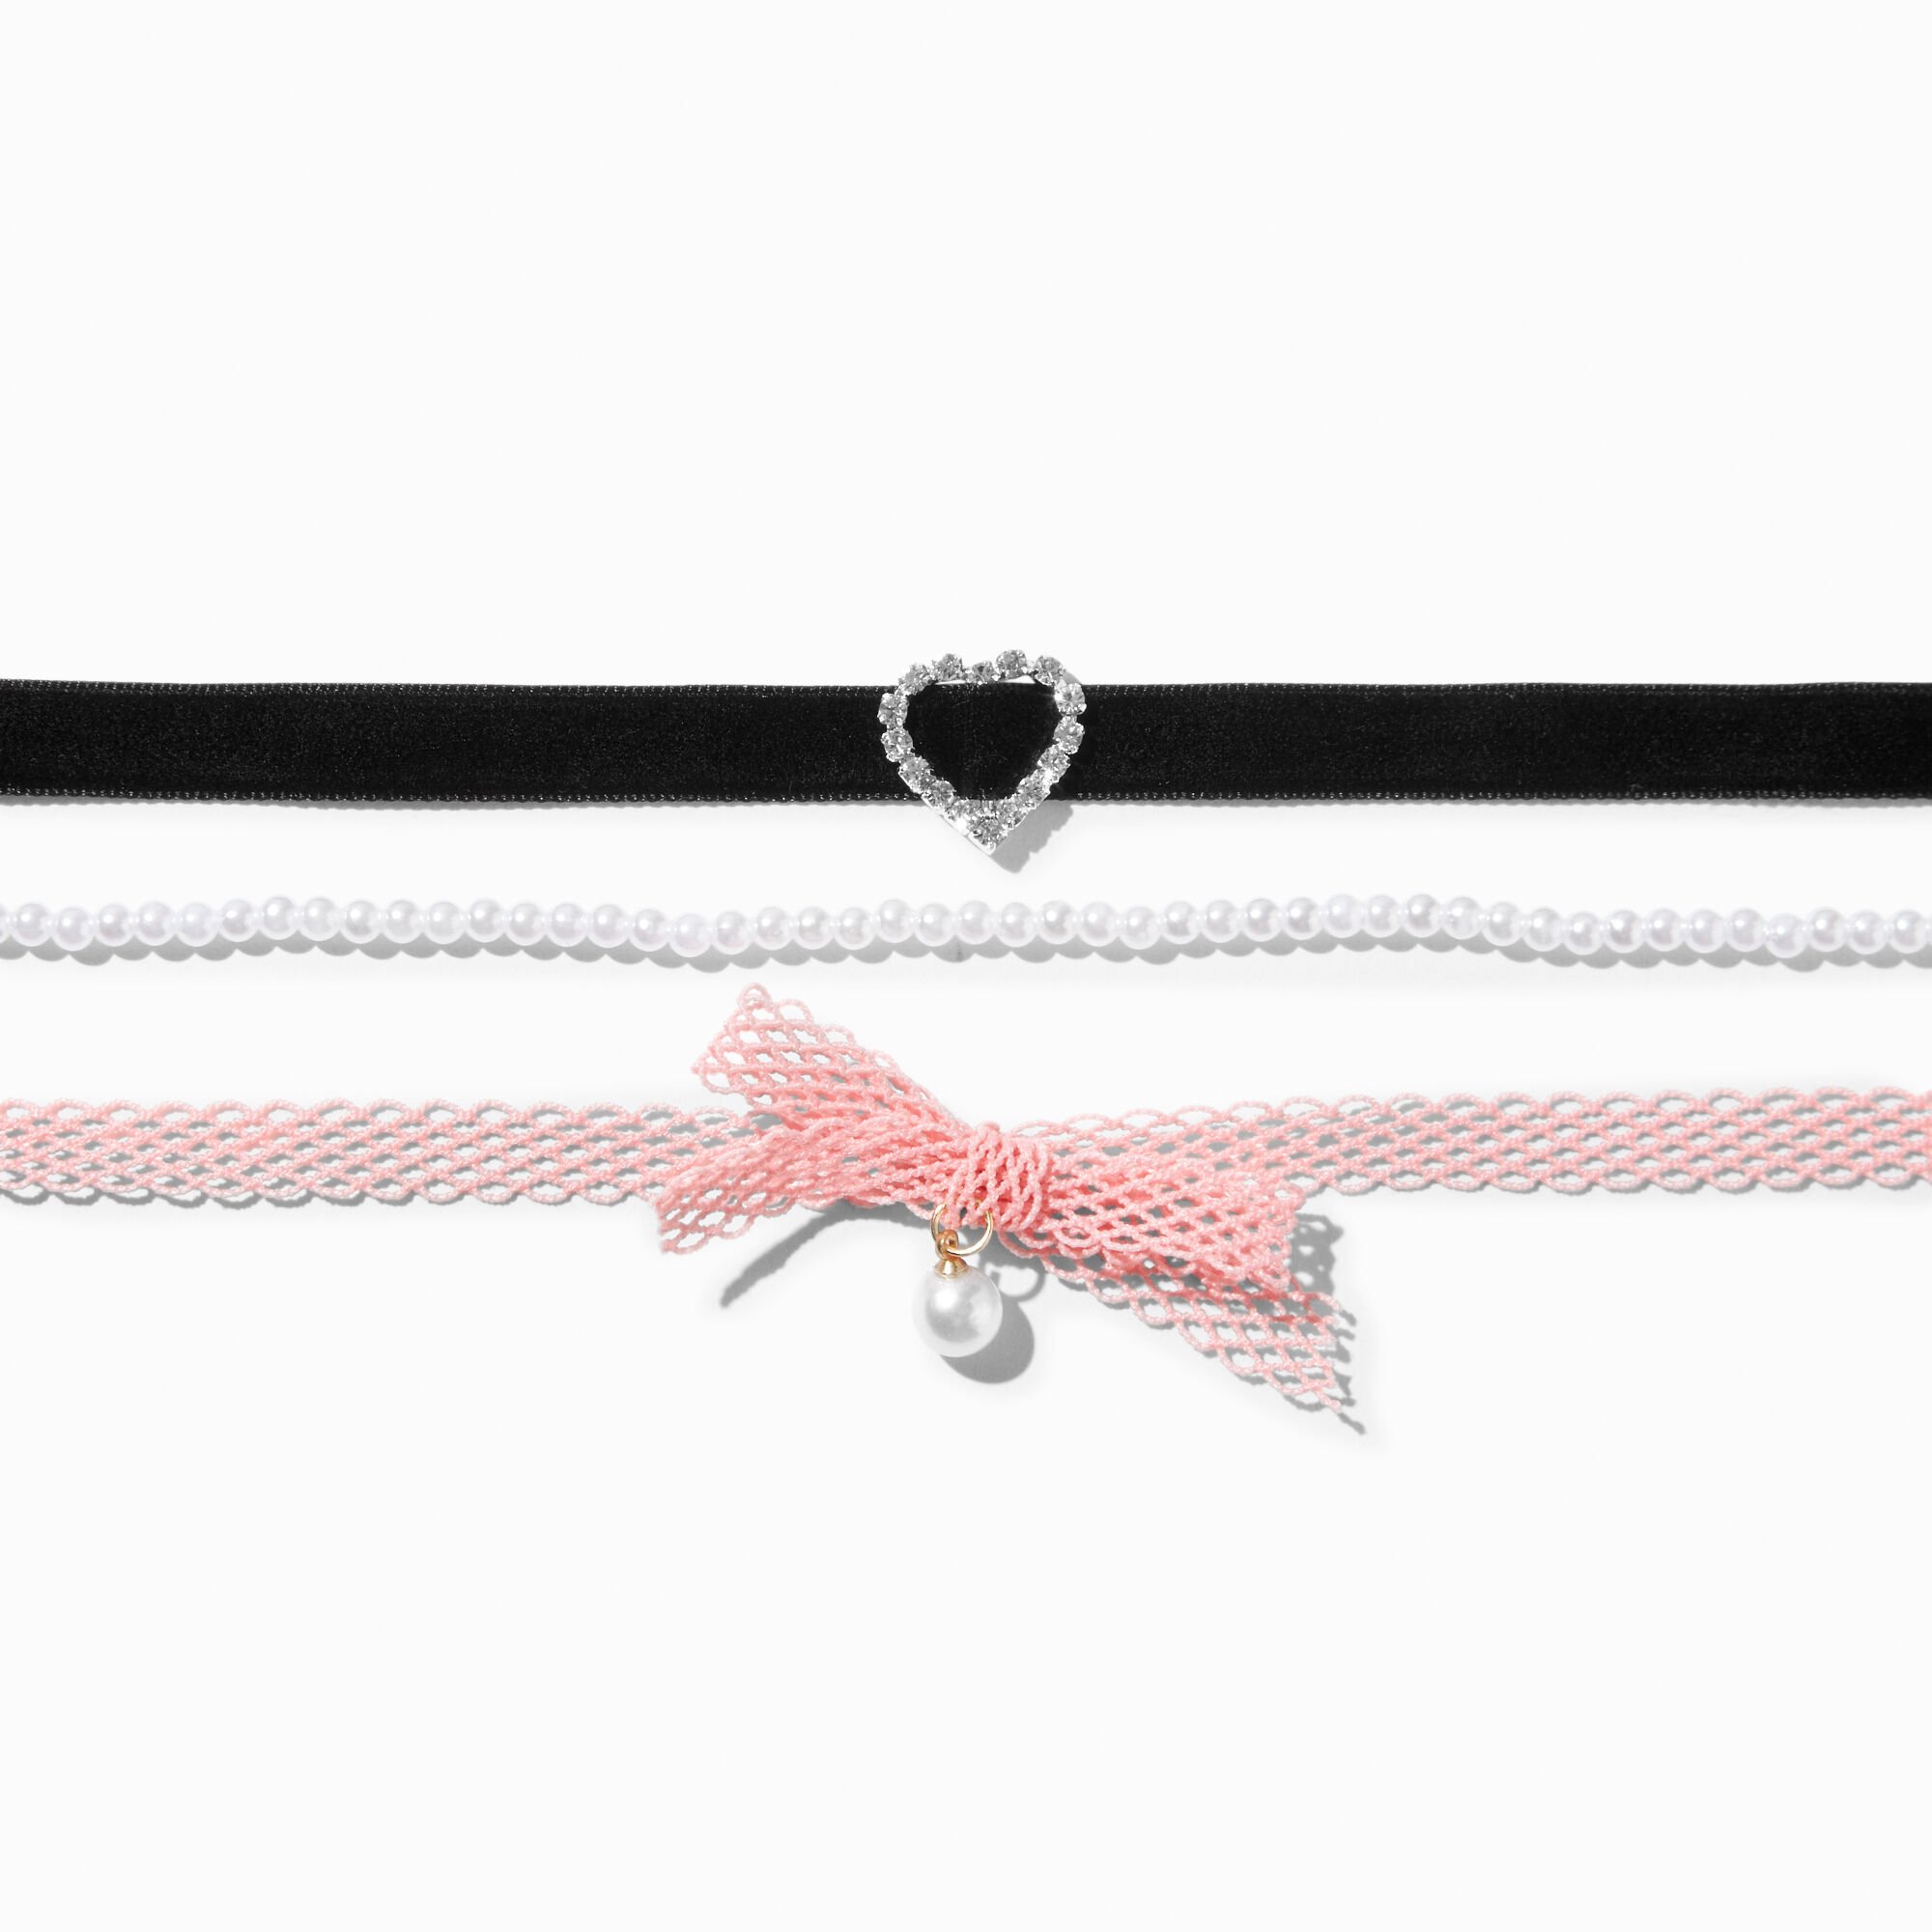 View Claires Mesh Heart Velvet Choker Necklaces 3 Pack Pink information